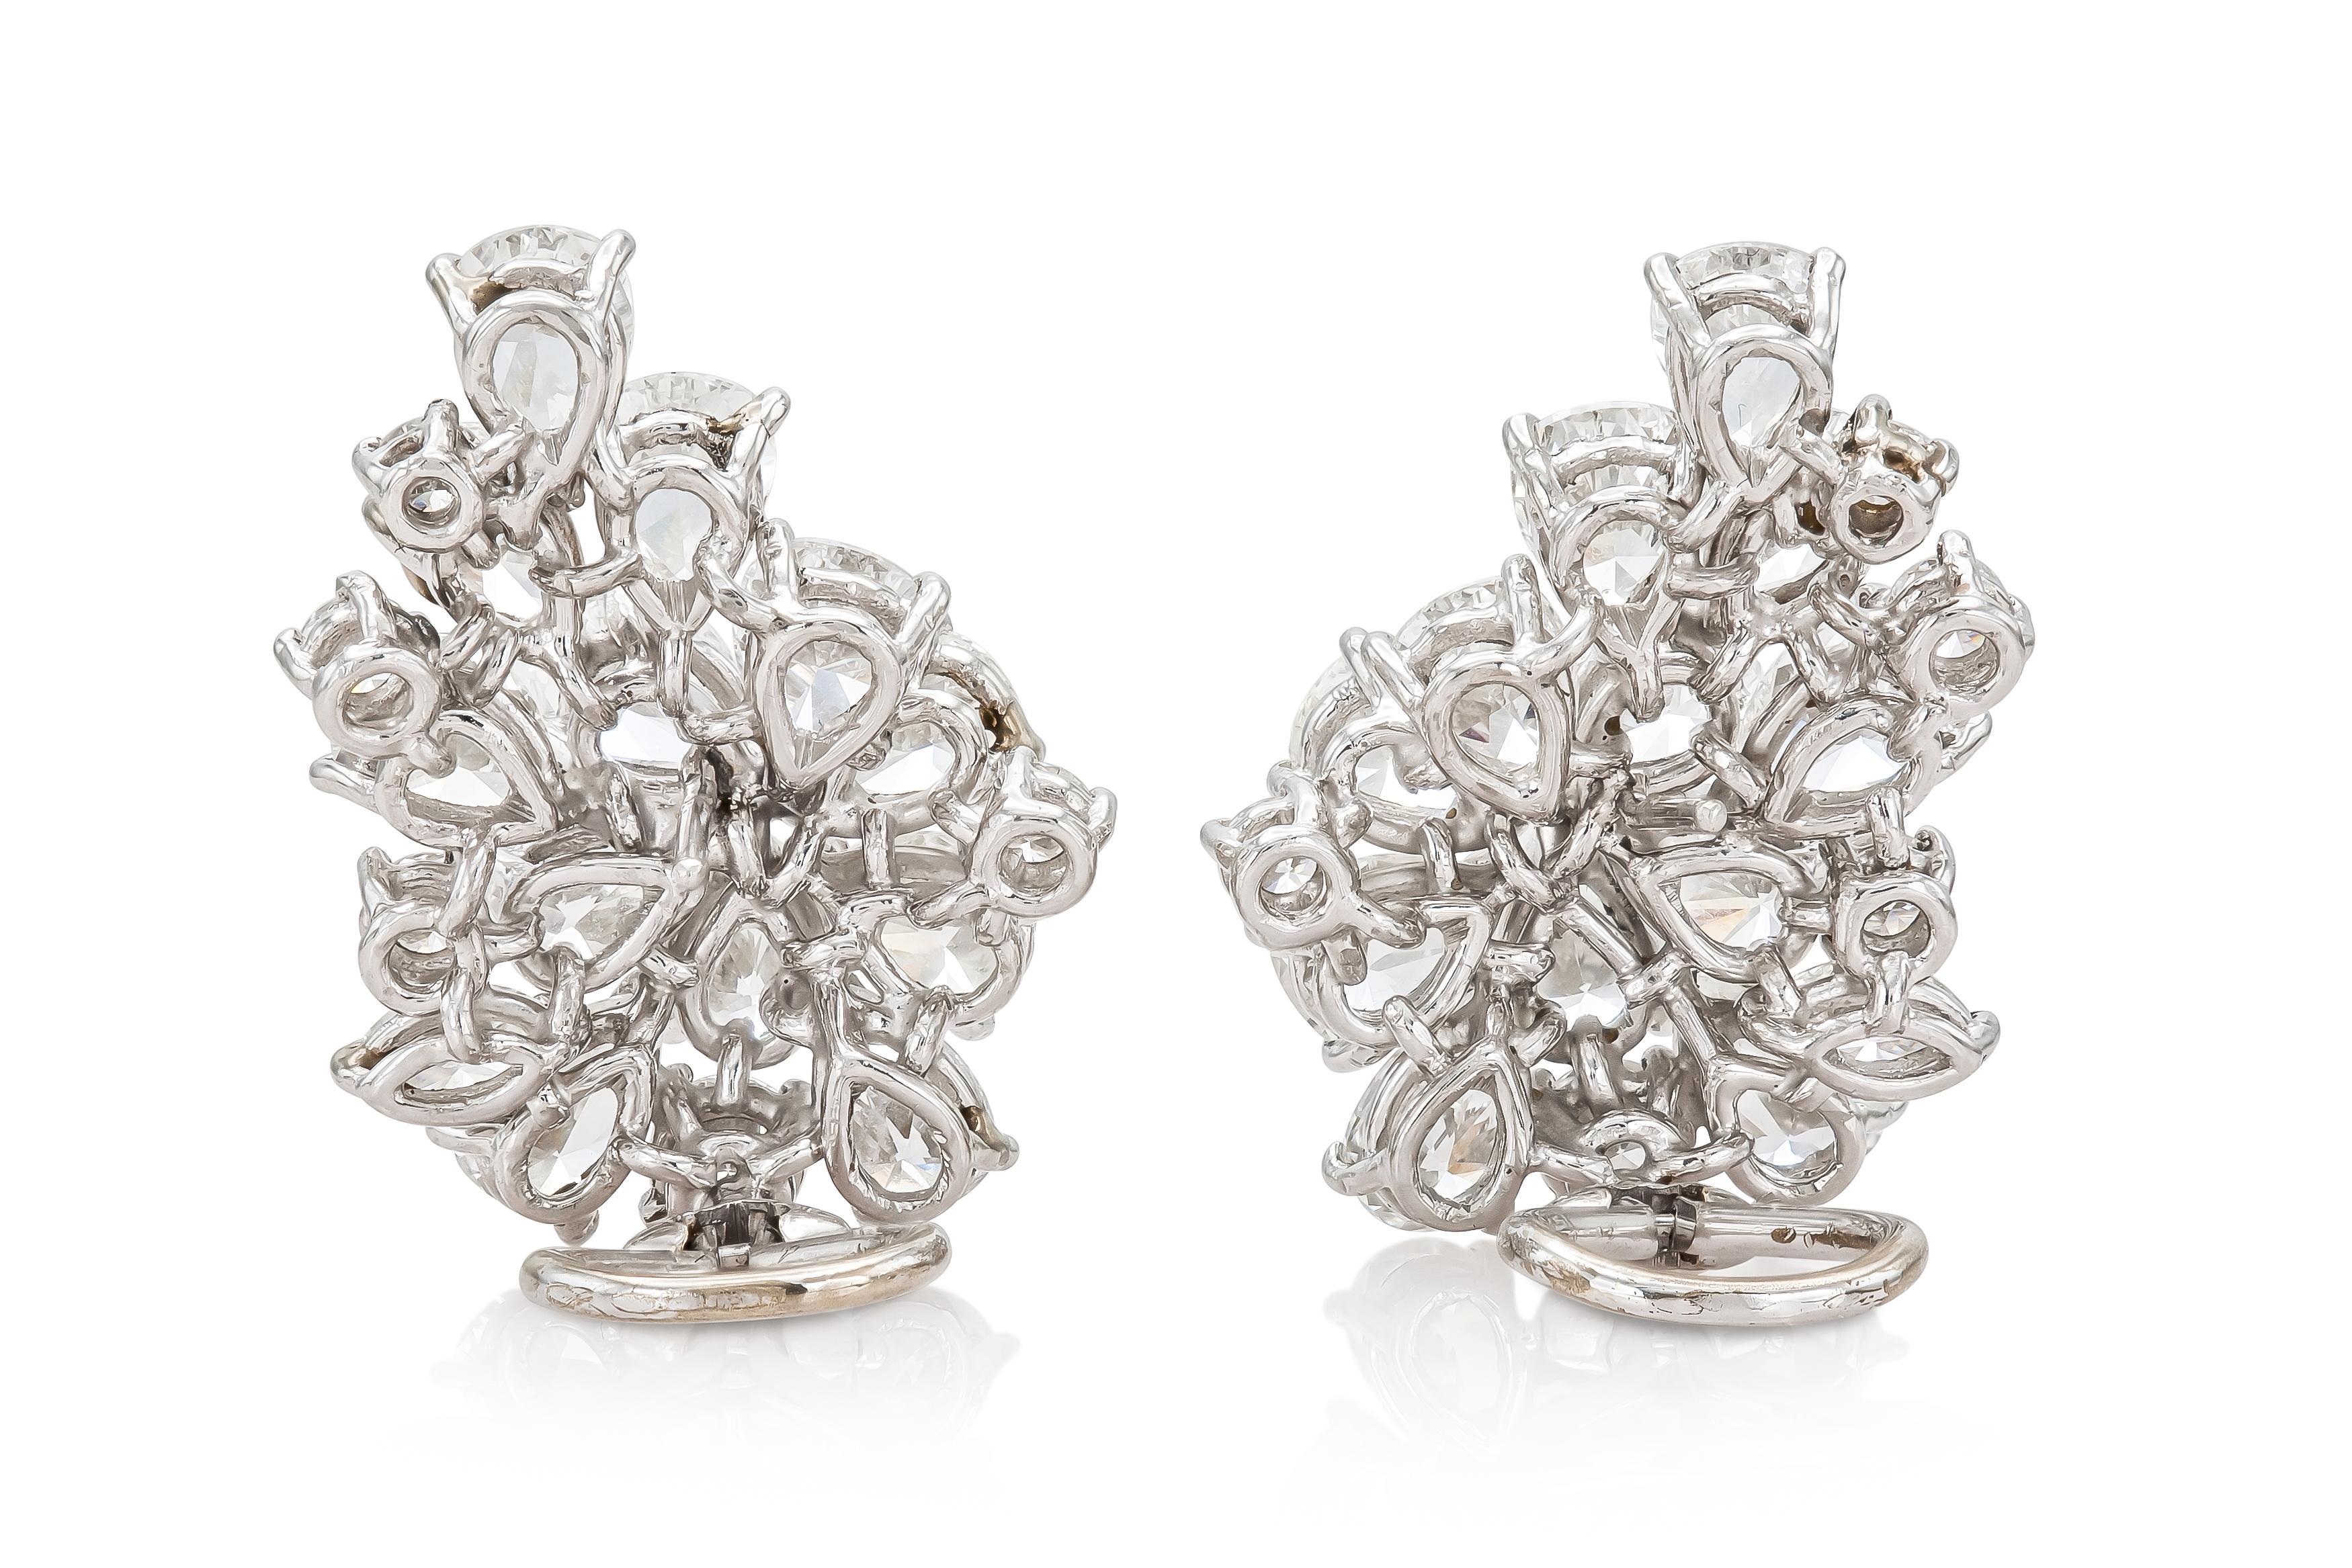 Vintage 1950s 14.28 Carat Diamond Earrings In Good Condition For Sale In New York, NY